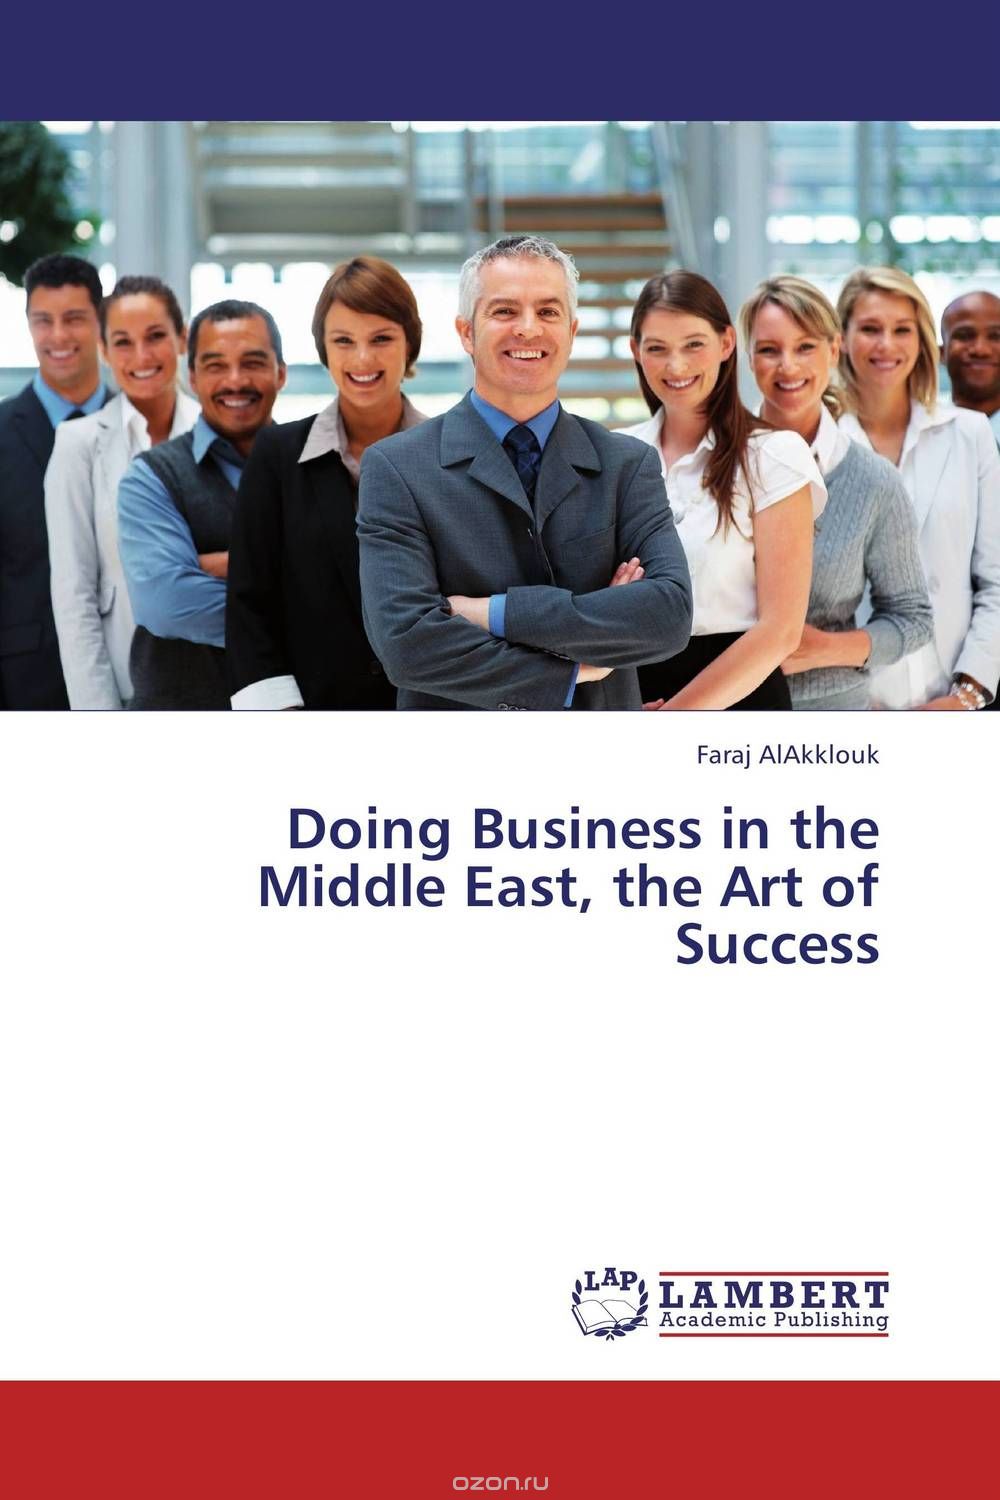 Скачать книгу "Doing Business in the Middle East, the Art of Success"